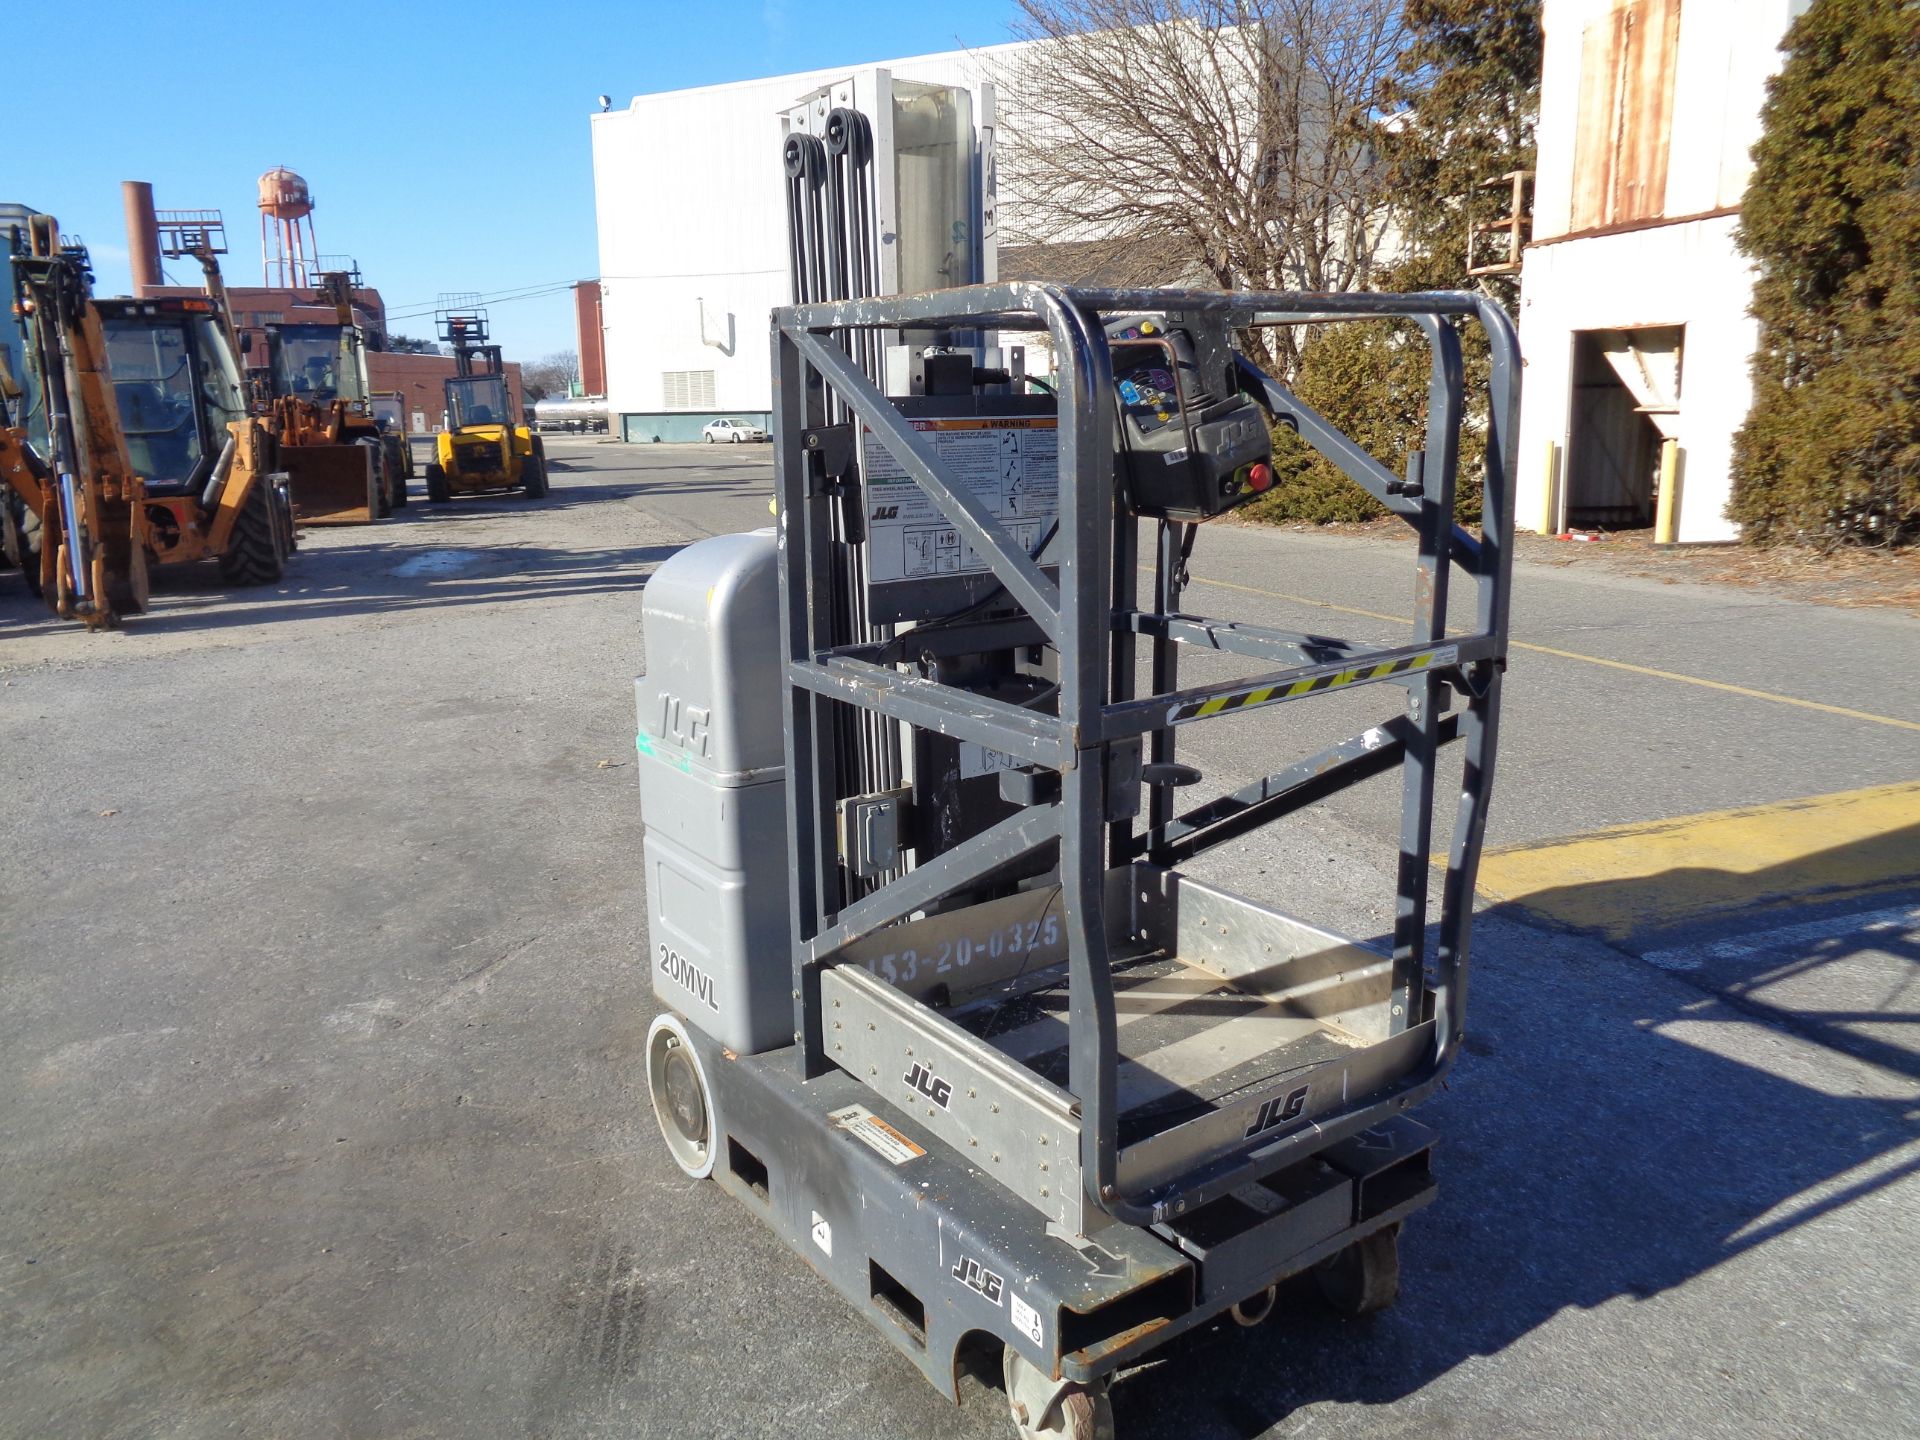 2013 JLG Electric Personal Scissor Lift - 20ft Height (1) - Image 2 of 10